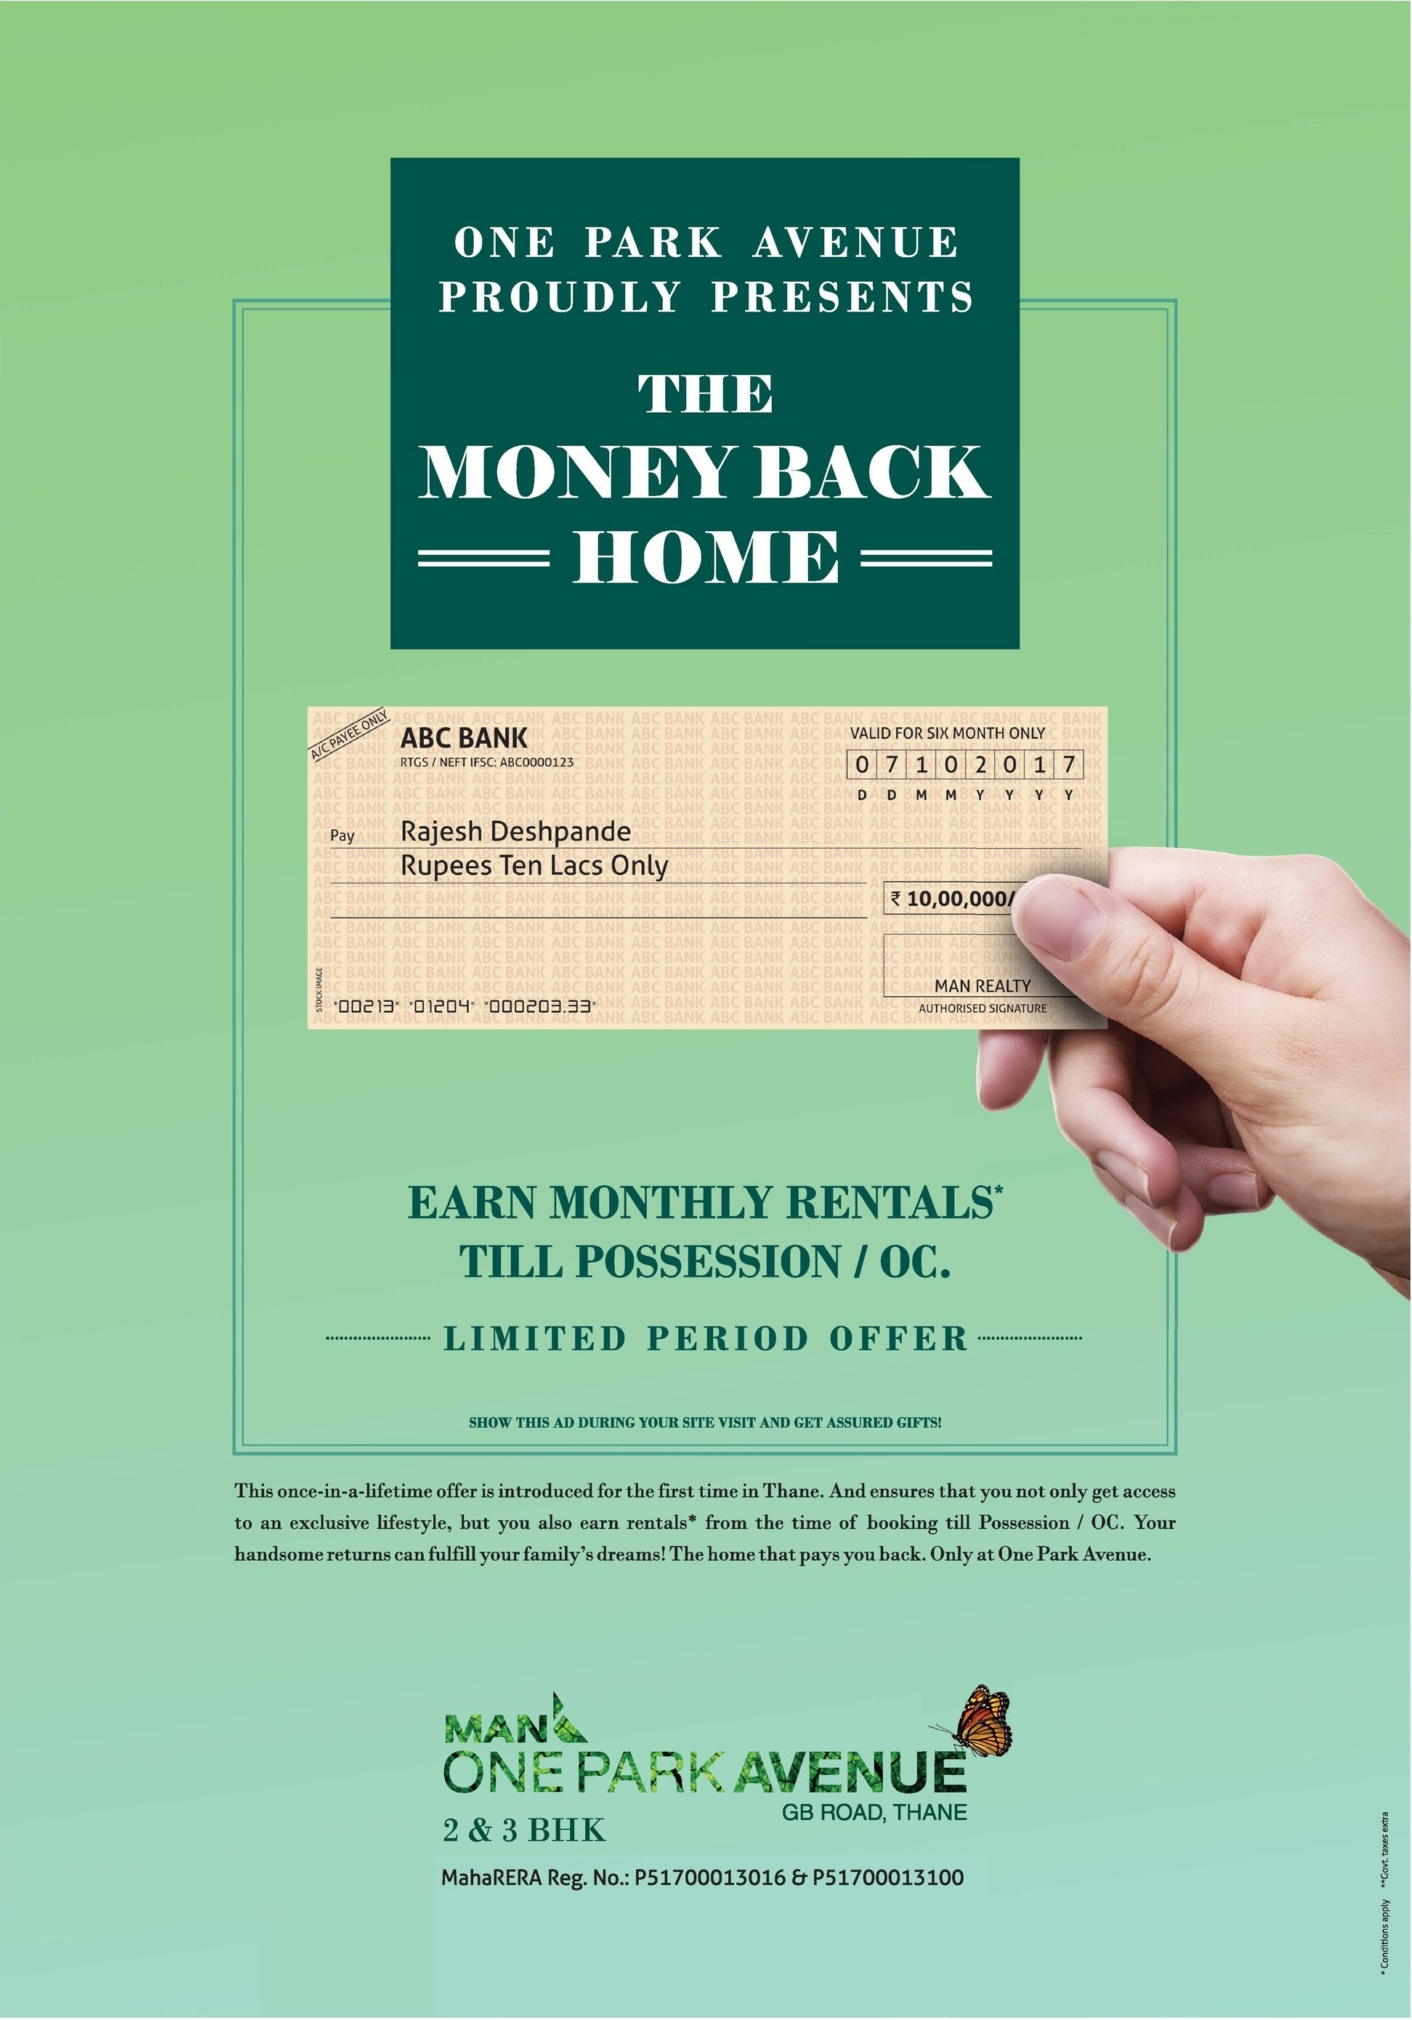 Man One Park Avenue proudly presents The Money Back Home in Mumbai